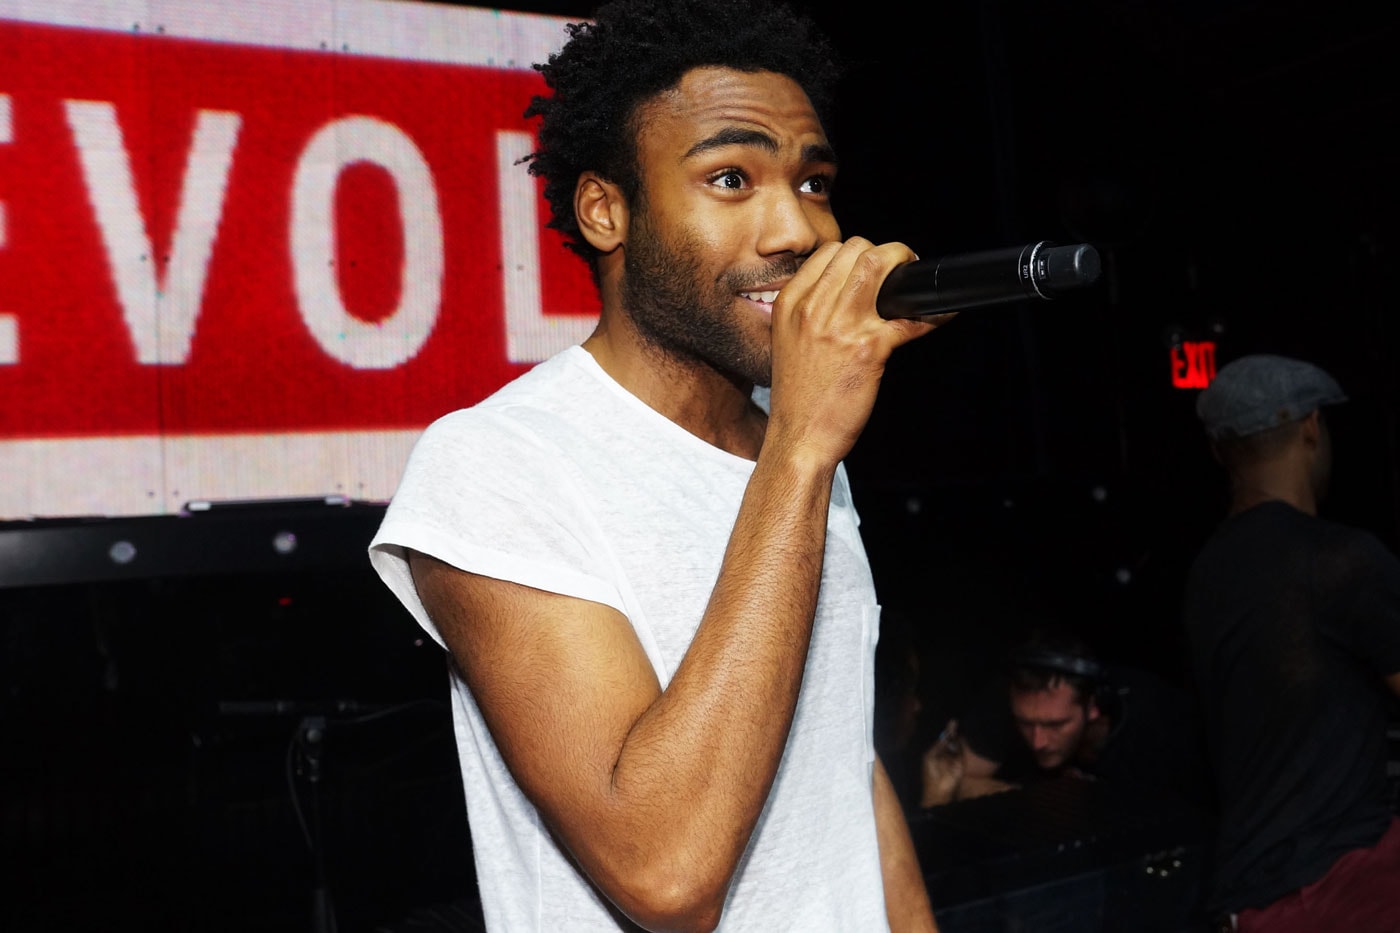 childish gambino this is america two new 2 songs stream tickets algorhythm all night live